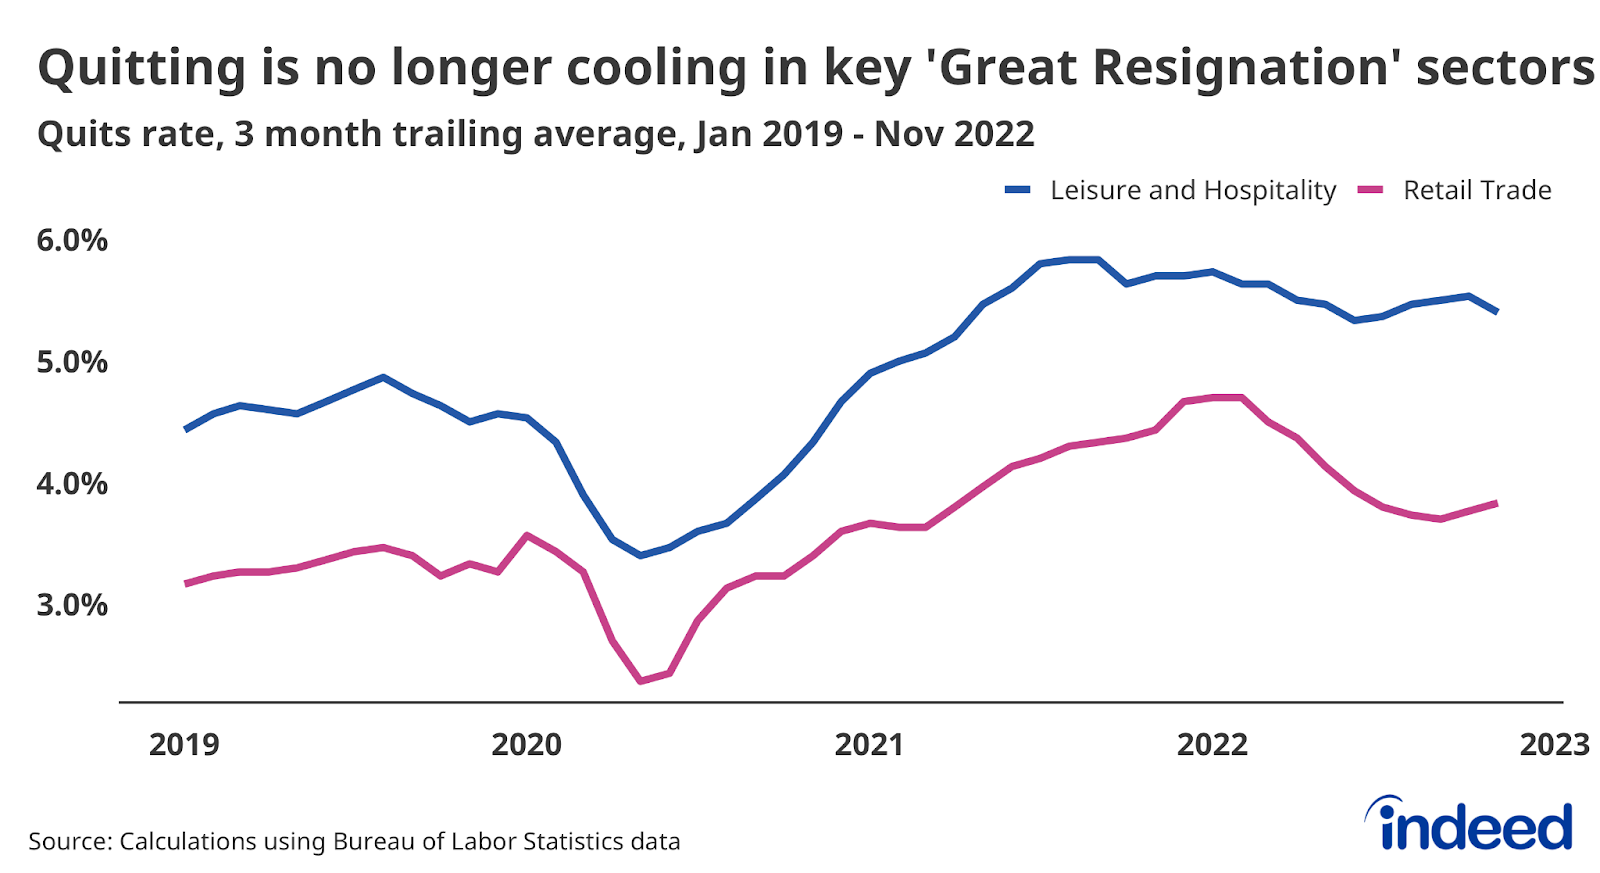 A line graph titled “Quitting is no longer cooling in key ‘Great Resignation’ sectors” covering January 2019 to November 2022.